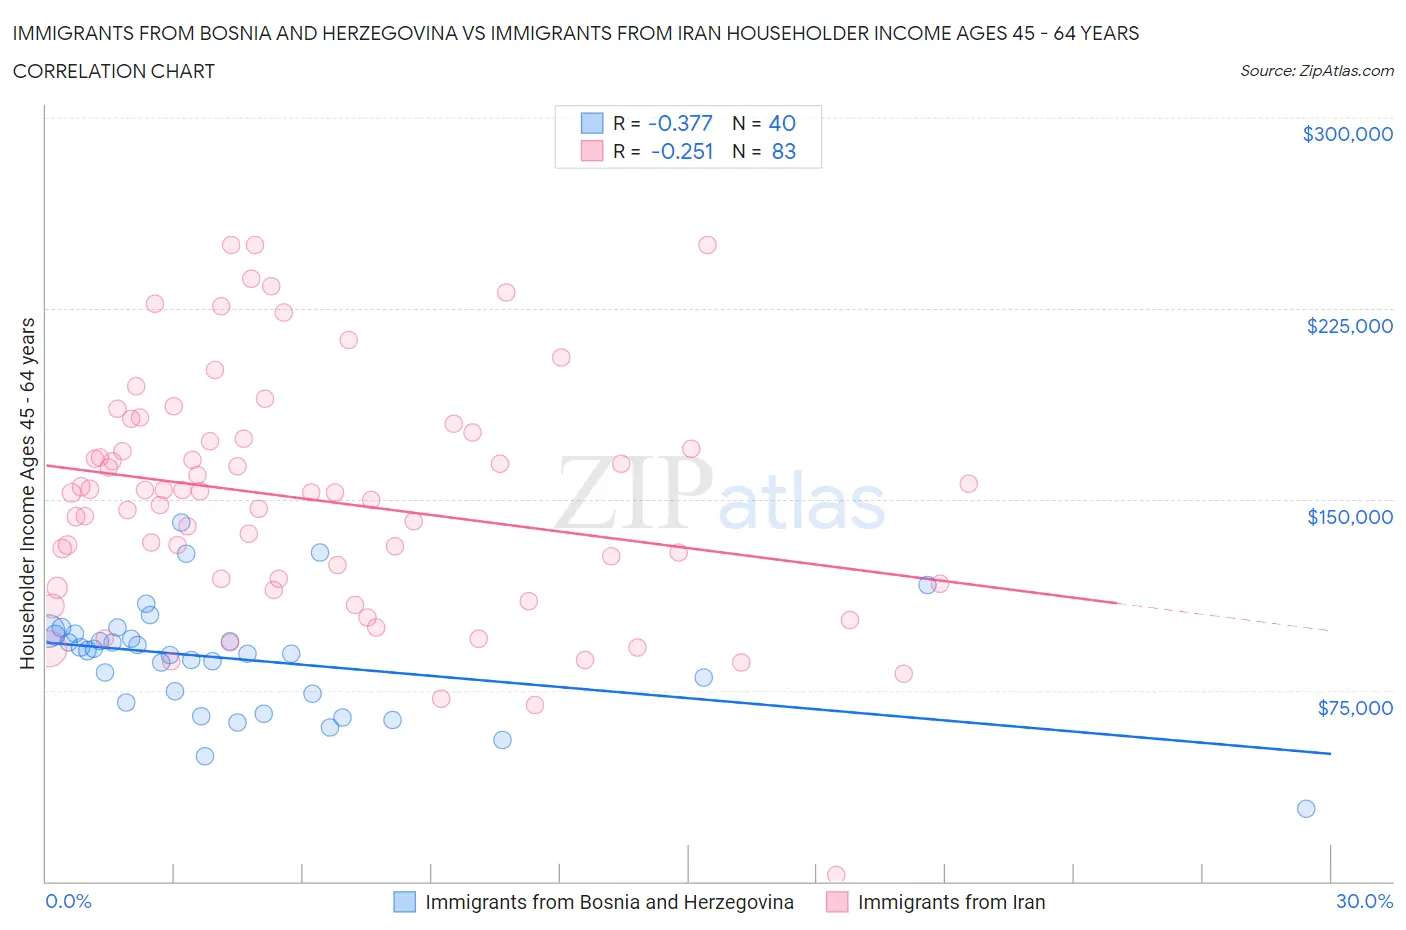 Immigrants from Bosnia and Herzegovina vs Immigrants from Iran Householder Income Ages 45 - 64 years